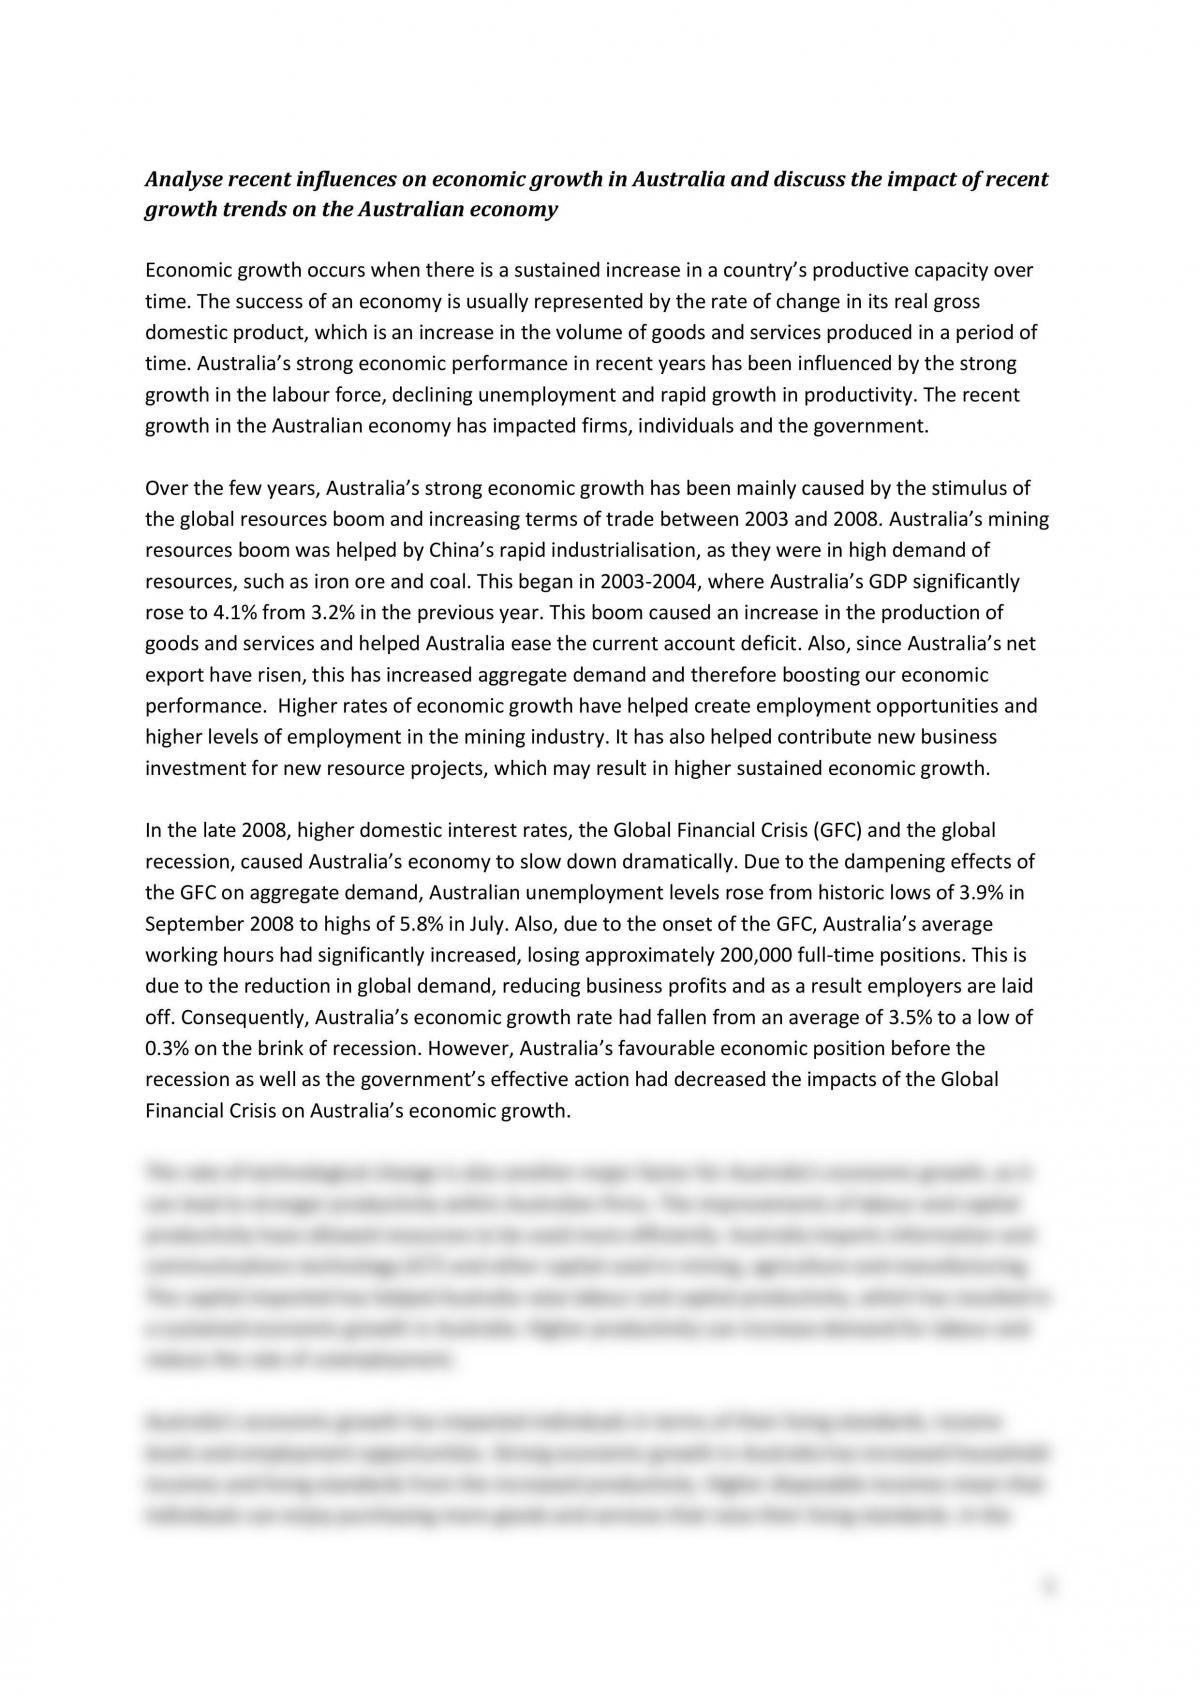 write essay about economic growth